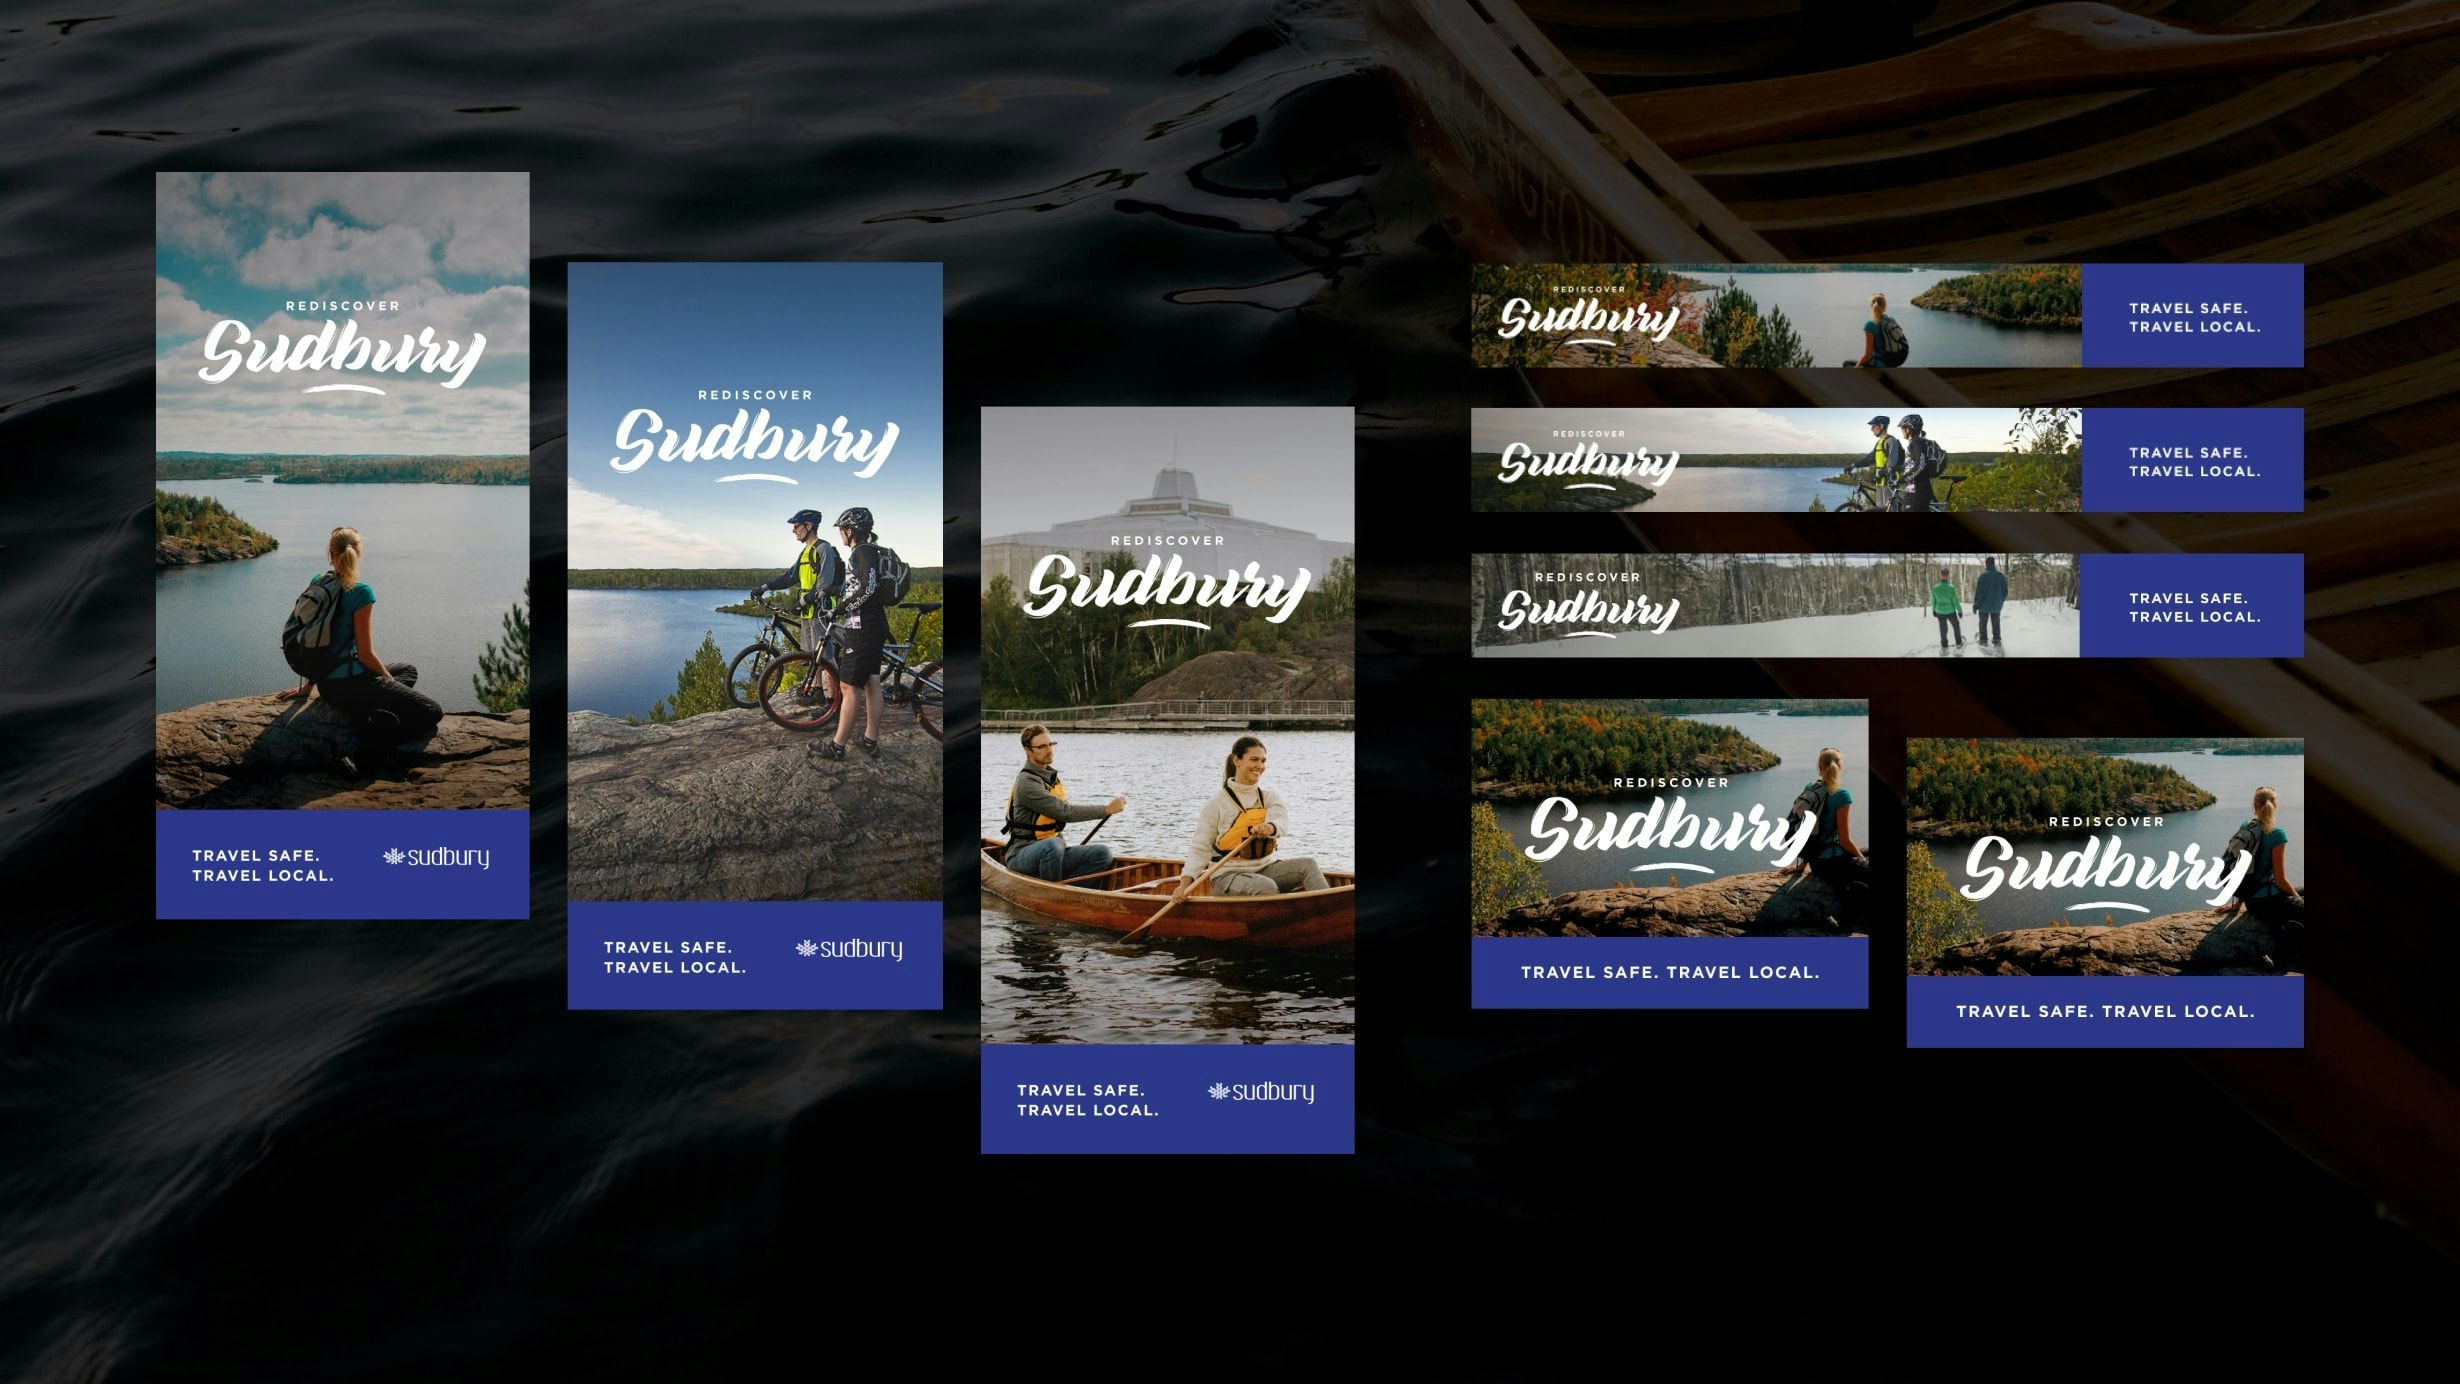 Various digital banner tourism ads for the City of Greater Sudbury